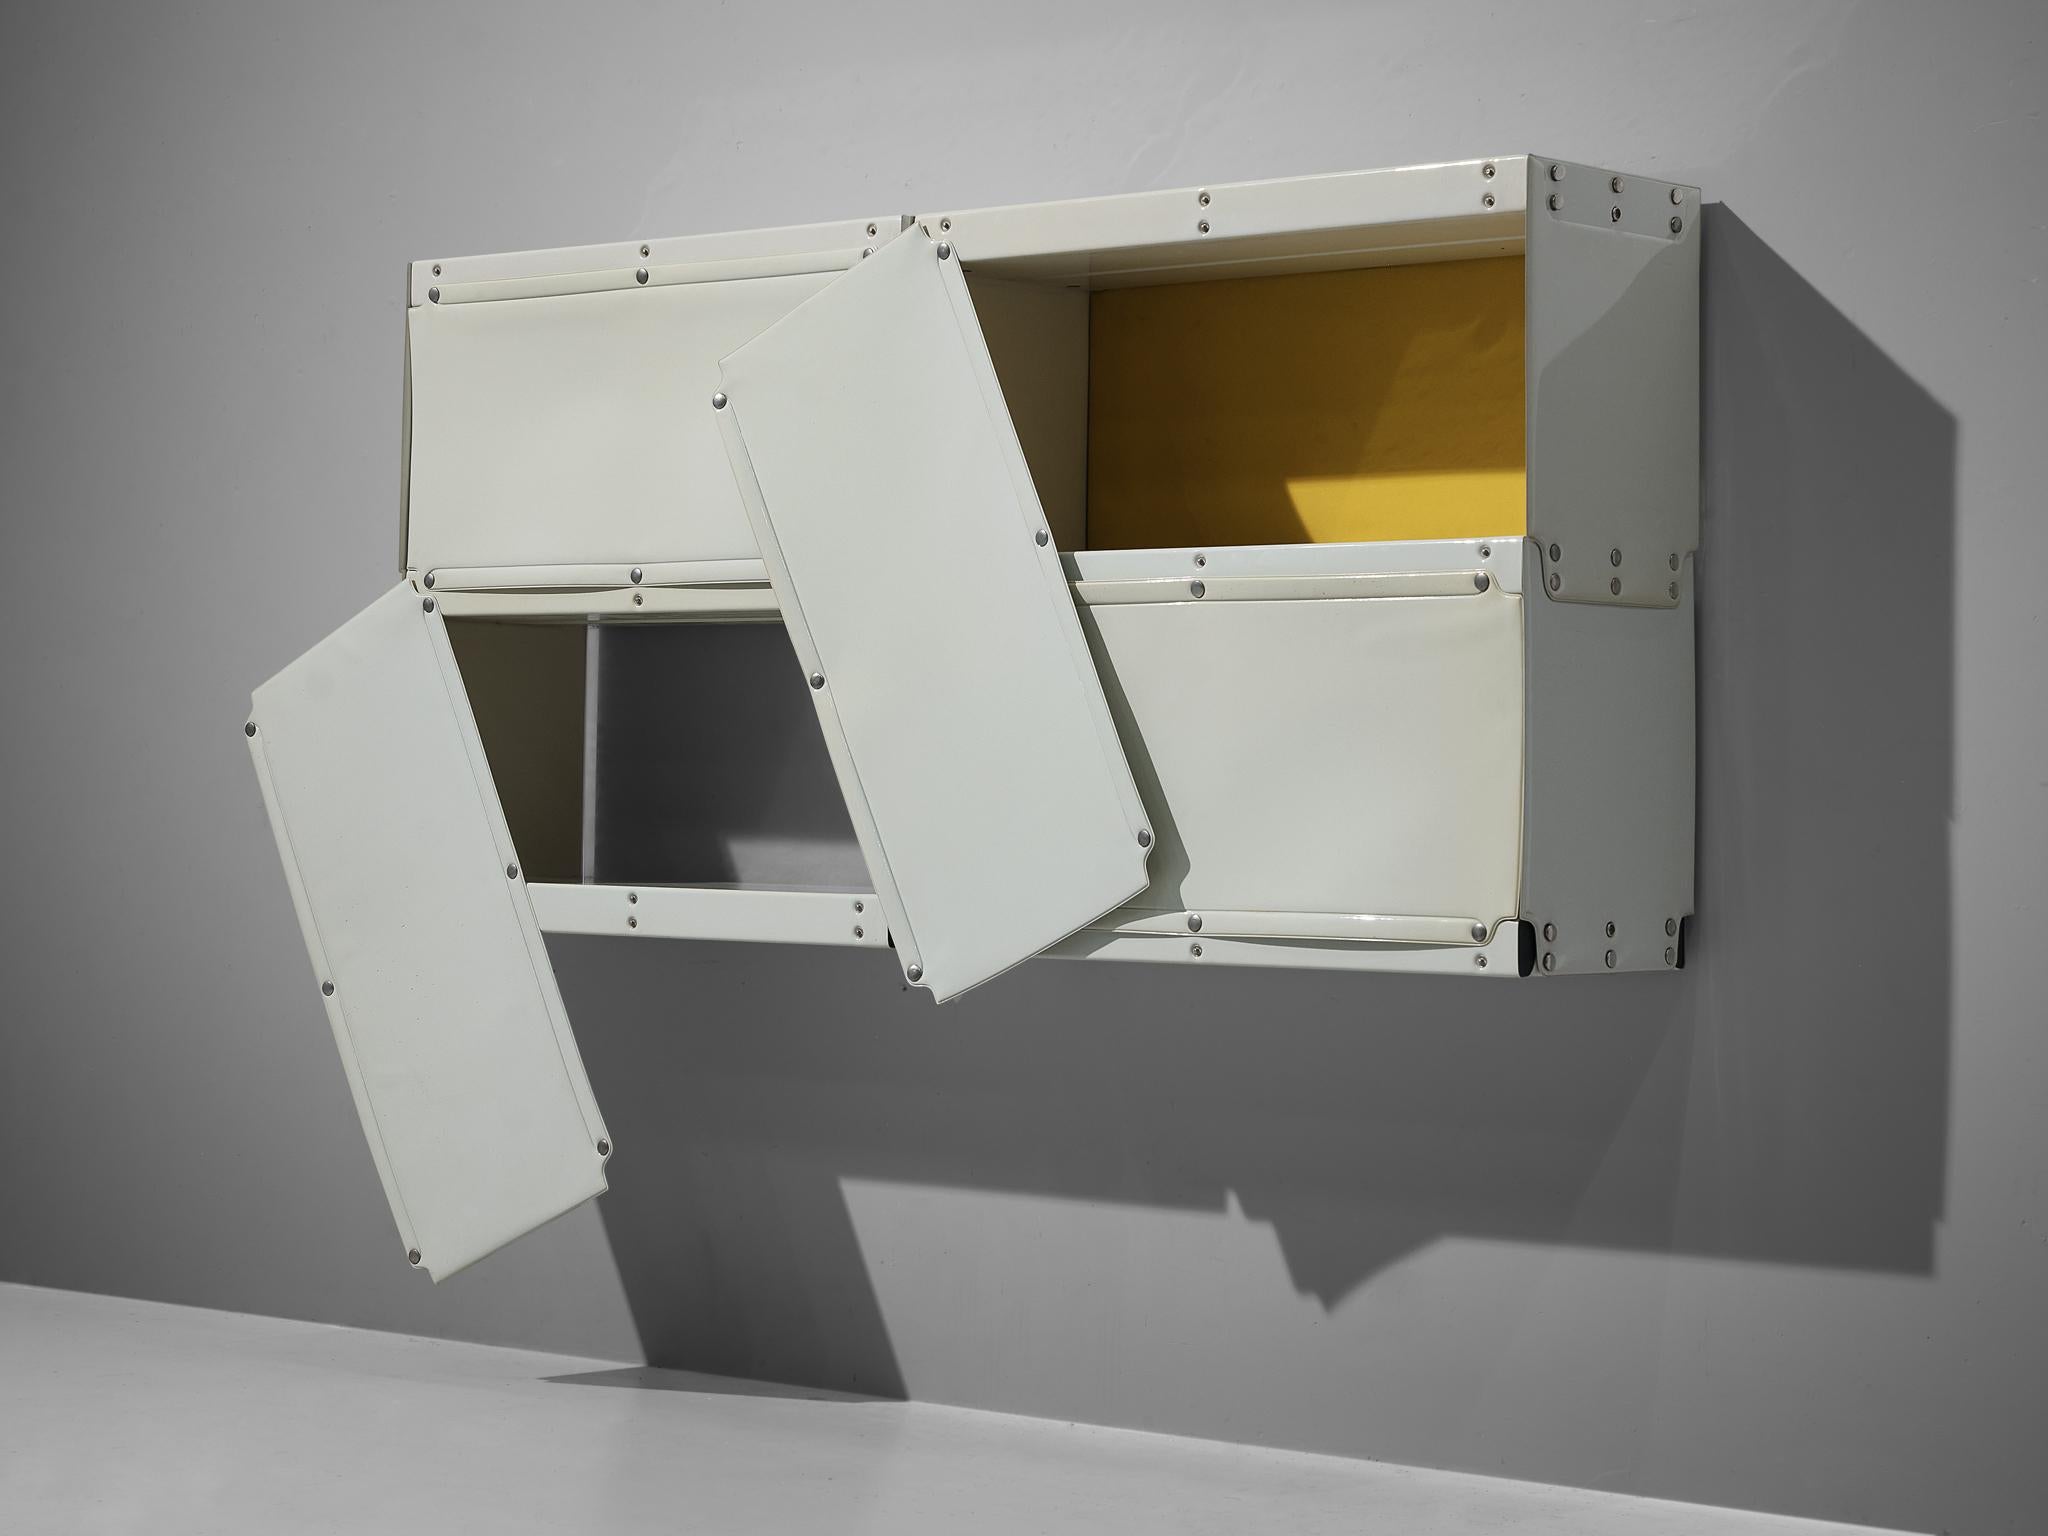 Otto Zapf for Zapfdesign 'Softline' white and yellow cabinets, plastic, Germany, 1969

Set of four detachable 'Softline' wall cabinets in white and yellow designed by the German designer Otto Zapf. Zippers and press studs form the connections and